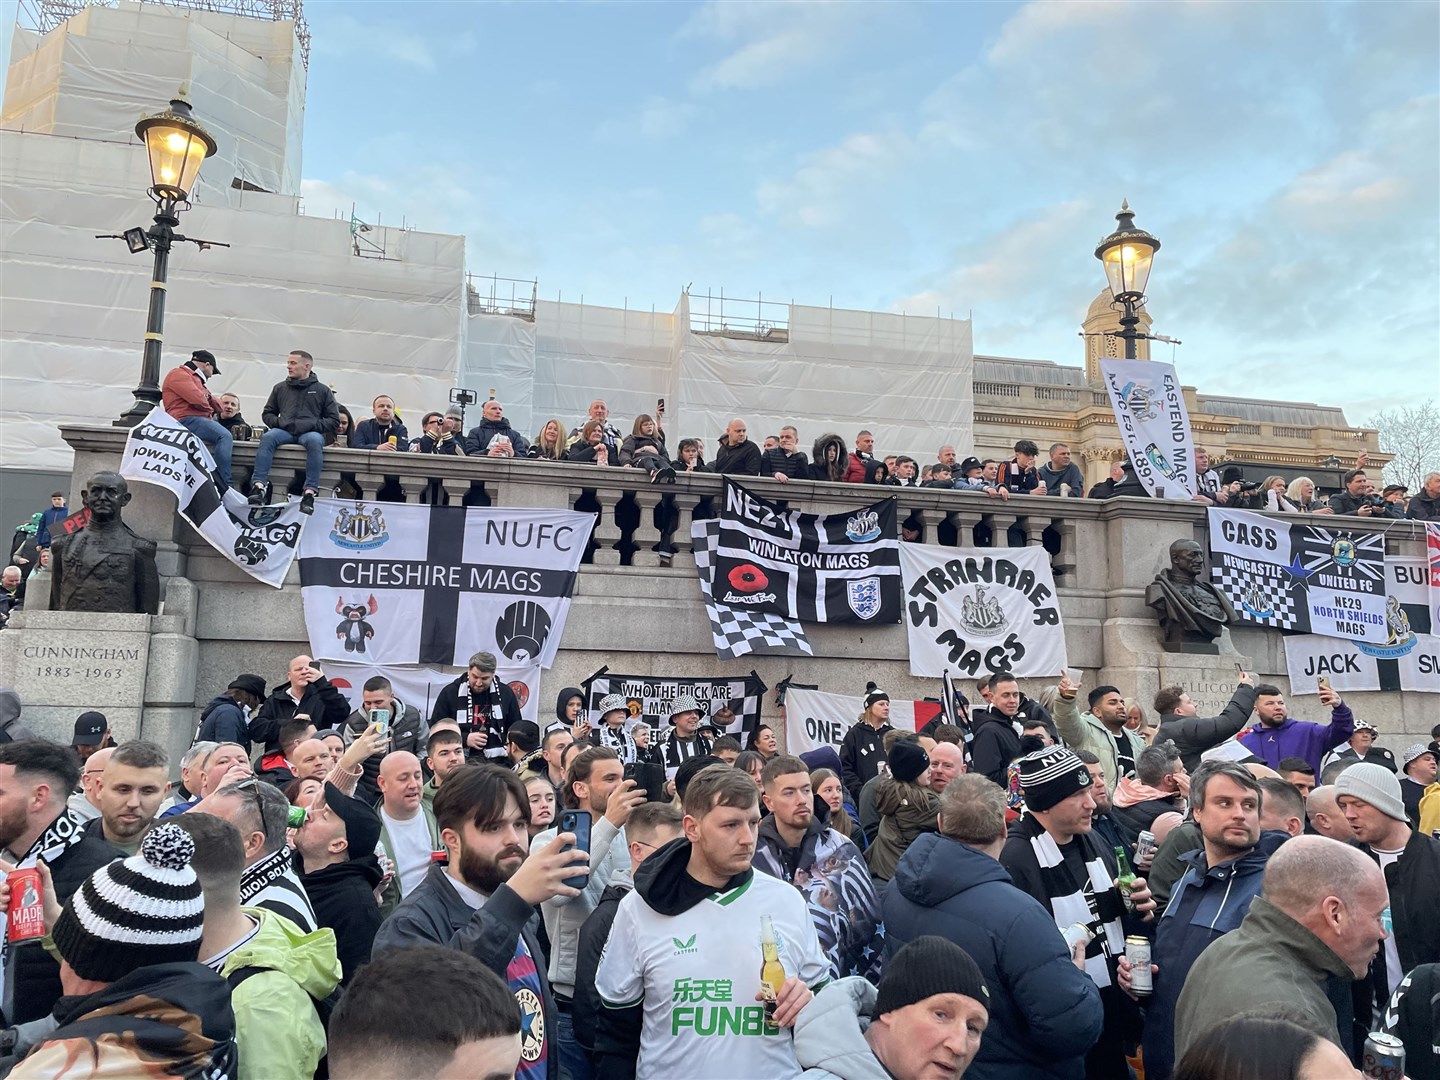 Newcastle fans singing and chanting in Trafalgar Square (Stefan Rousseau/PA)